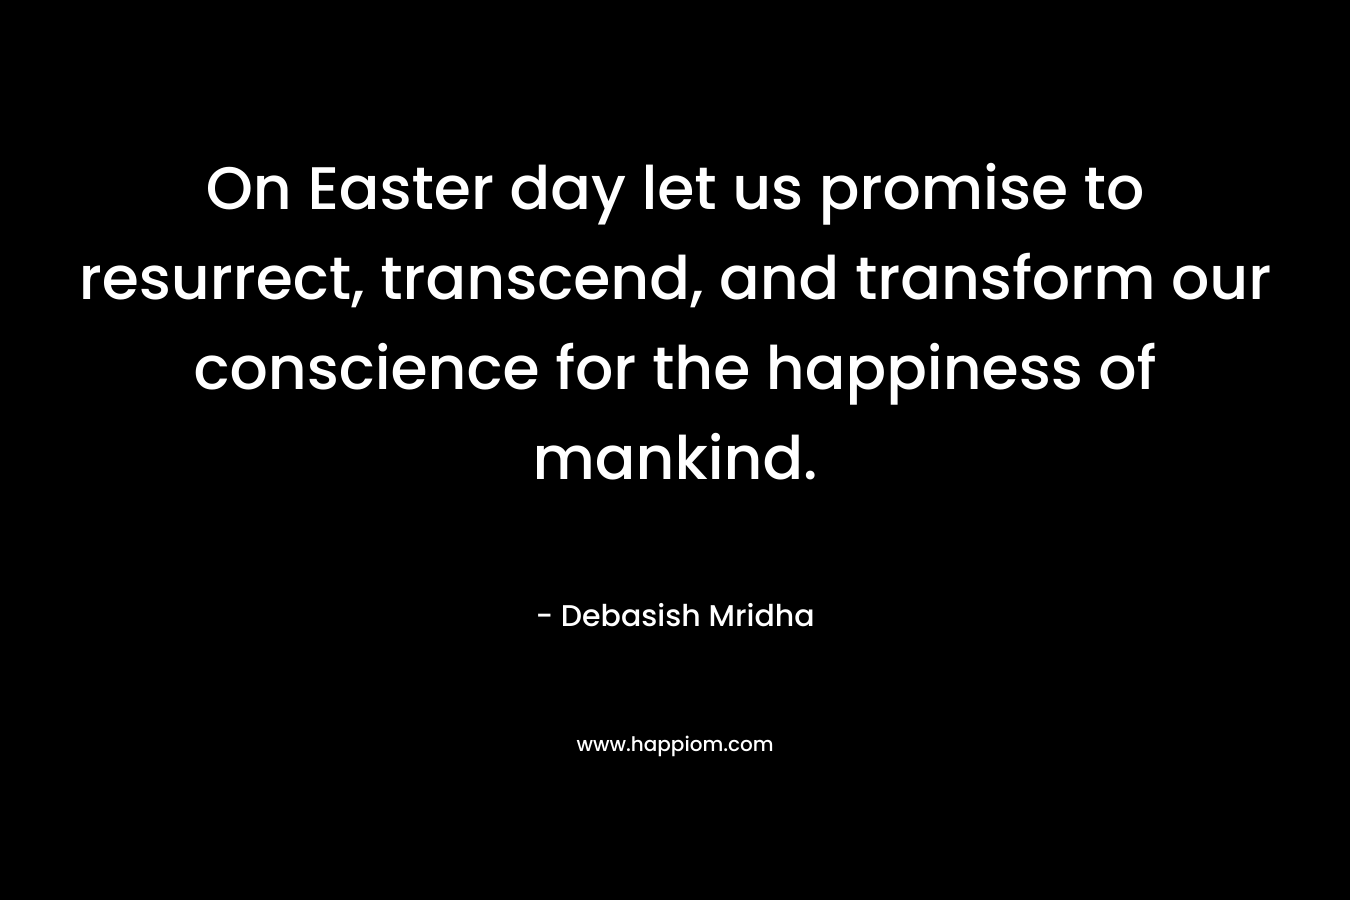 On Easter day let us promise to resurrect, transcend, and transform our conscience for the happiness of mankind.